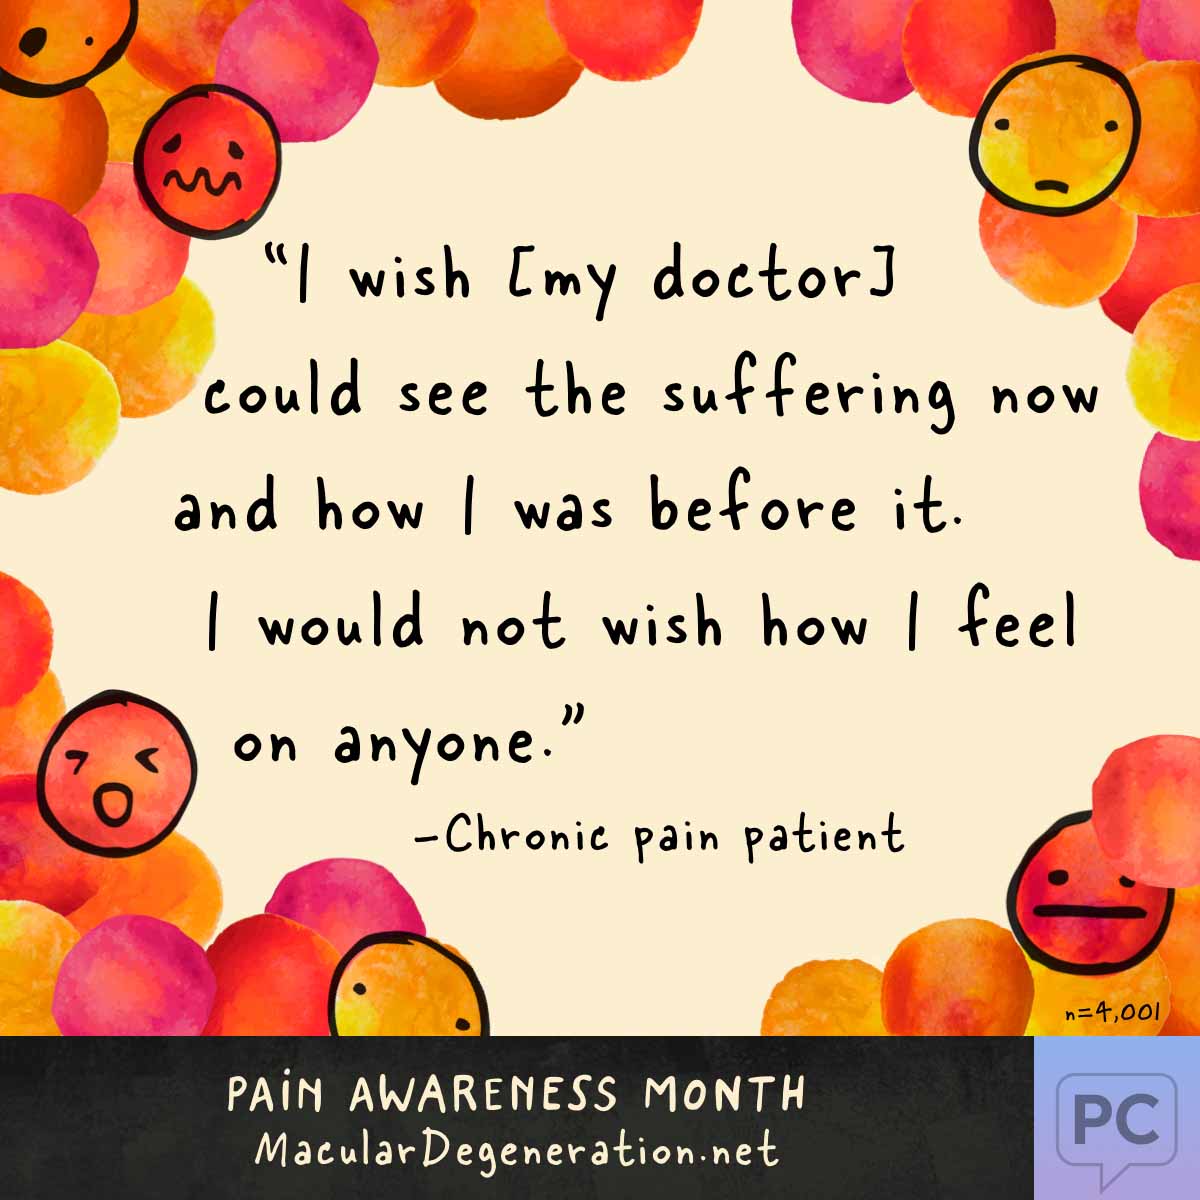 Quote: I wish my doctor could see the suffering now and how I was before it. I would not wish how I feel on anyone